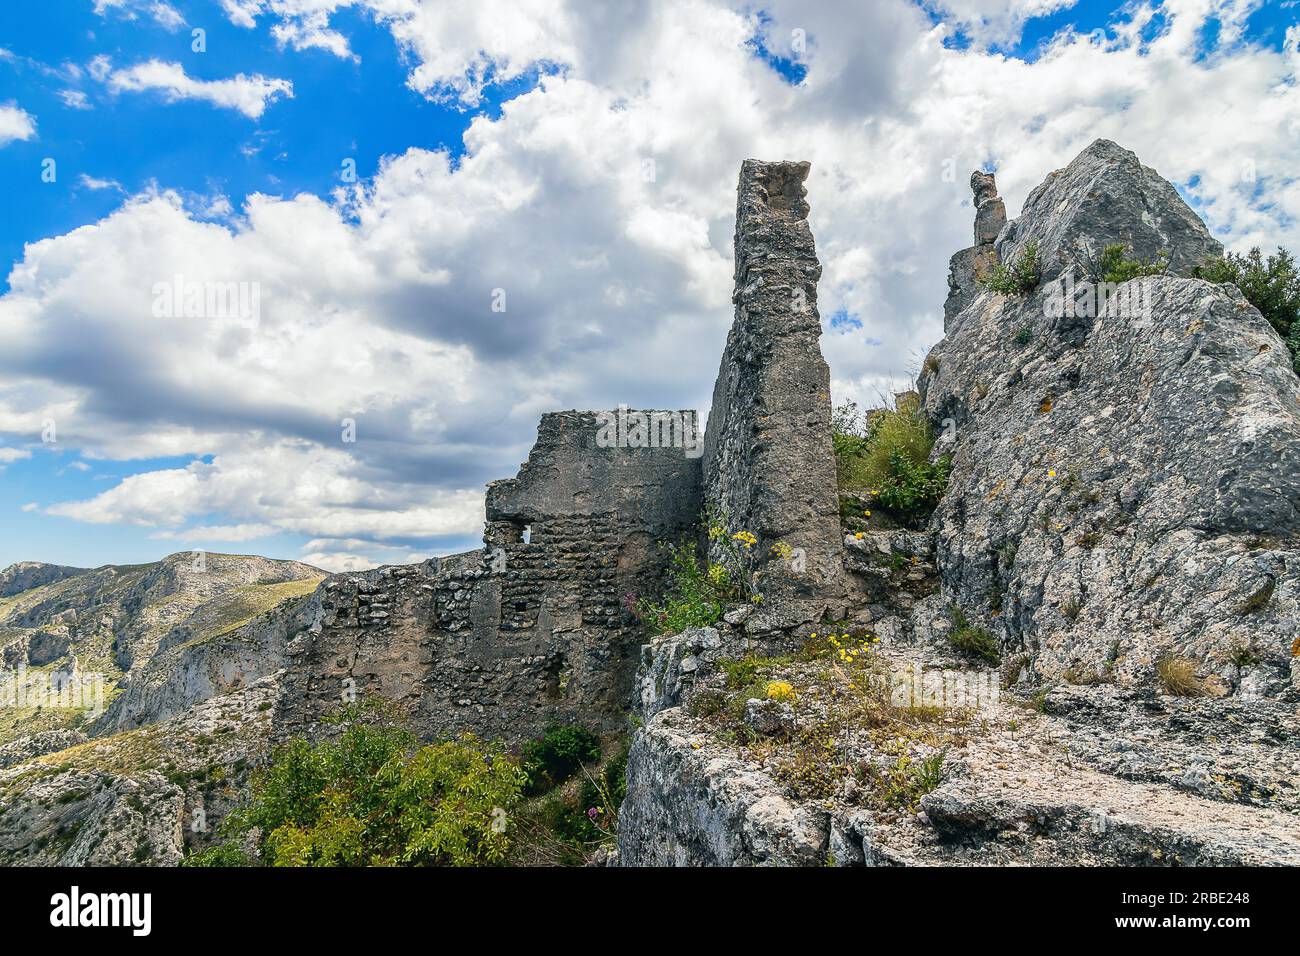 Ruins of the Castle of Benissili or Alcalà. It was the residence of the famous Moorish leader Al-Azraq. It dates from the eleventh century. Located in Stock Photo